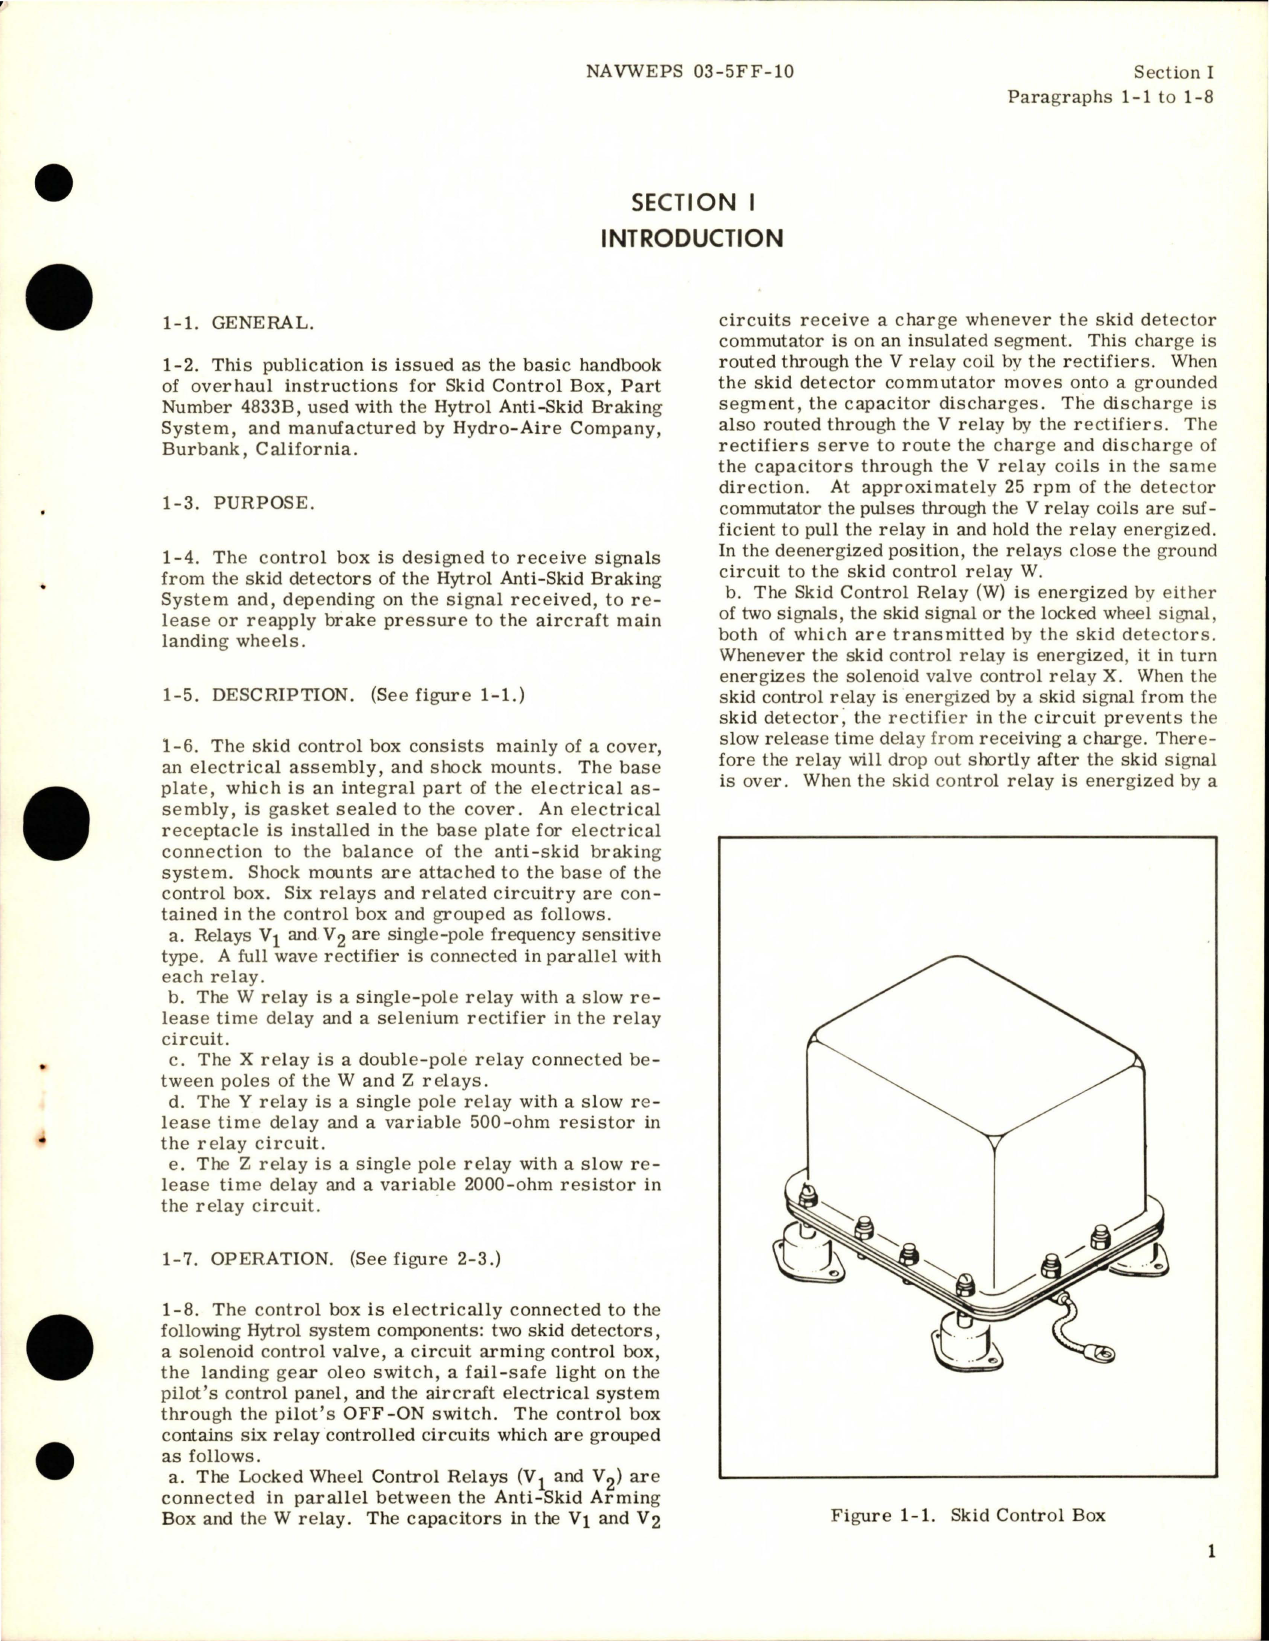 Sample page 5 from AirCorps Library document: Overhaul Instructions for Skid Control Box - Part 4833B